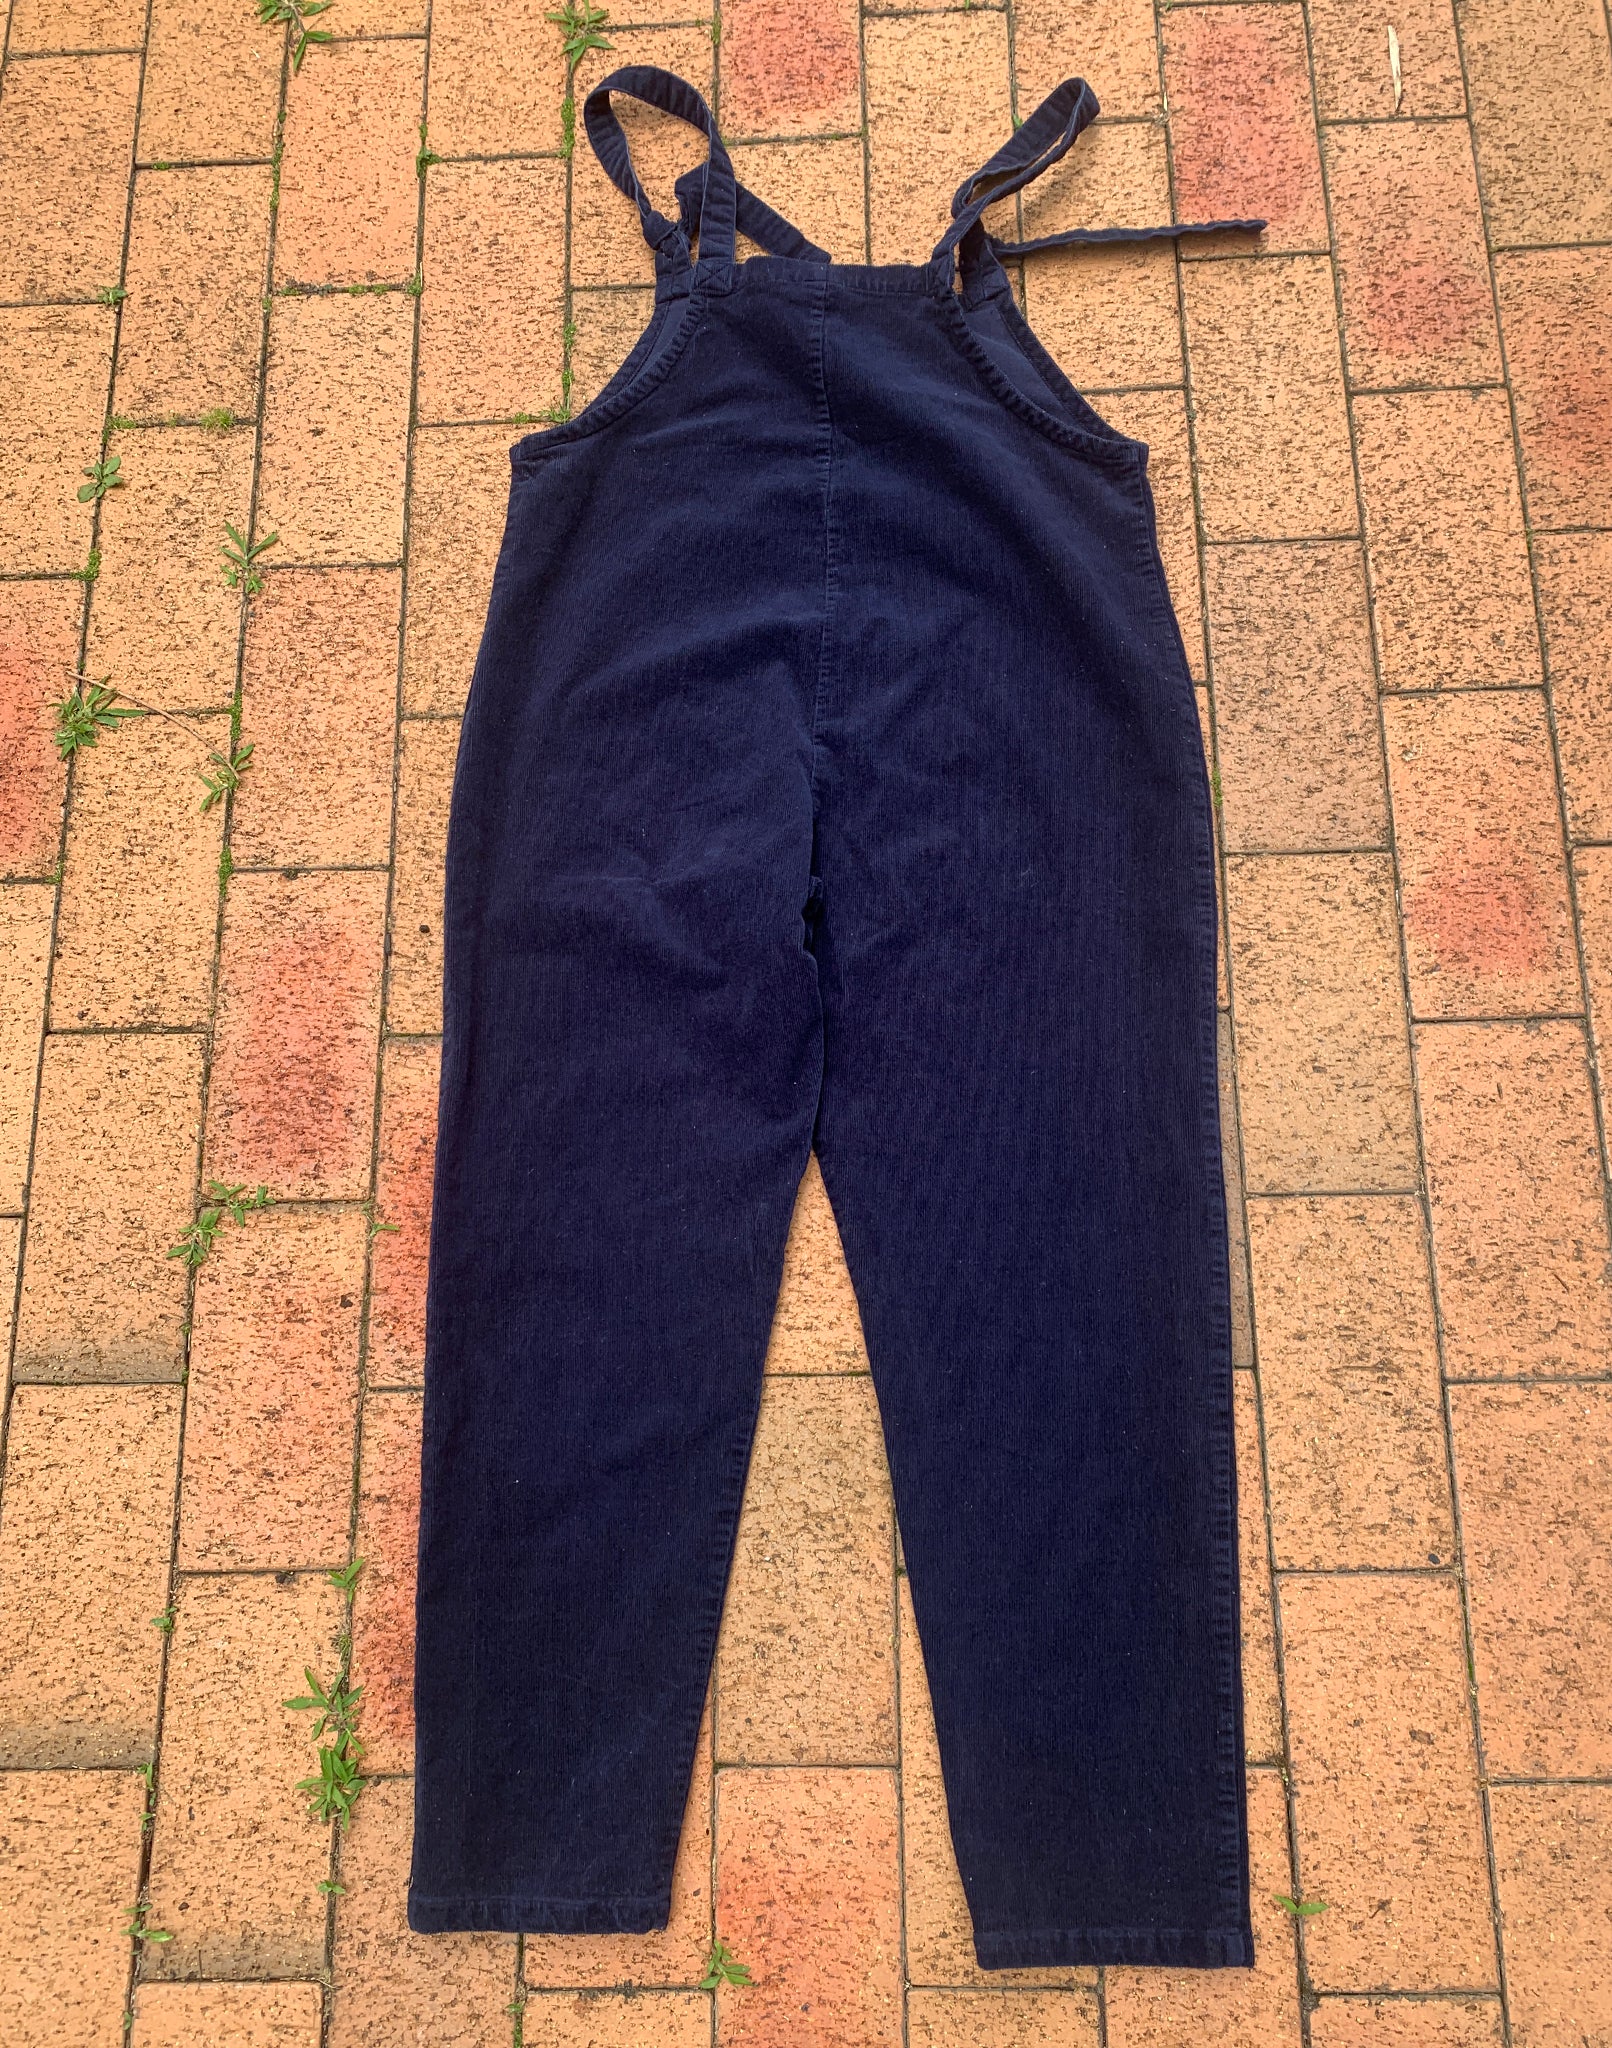 Lucy & Yak Navy Corduroy Cotton Dungarees - Size M